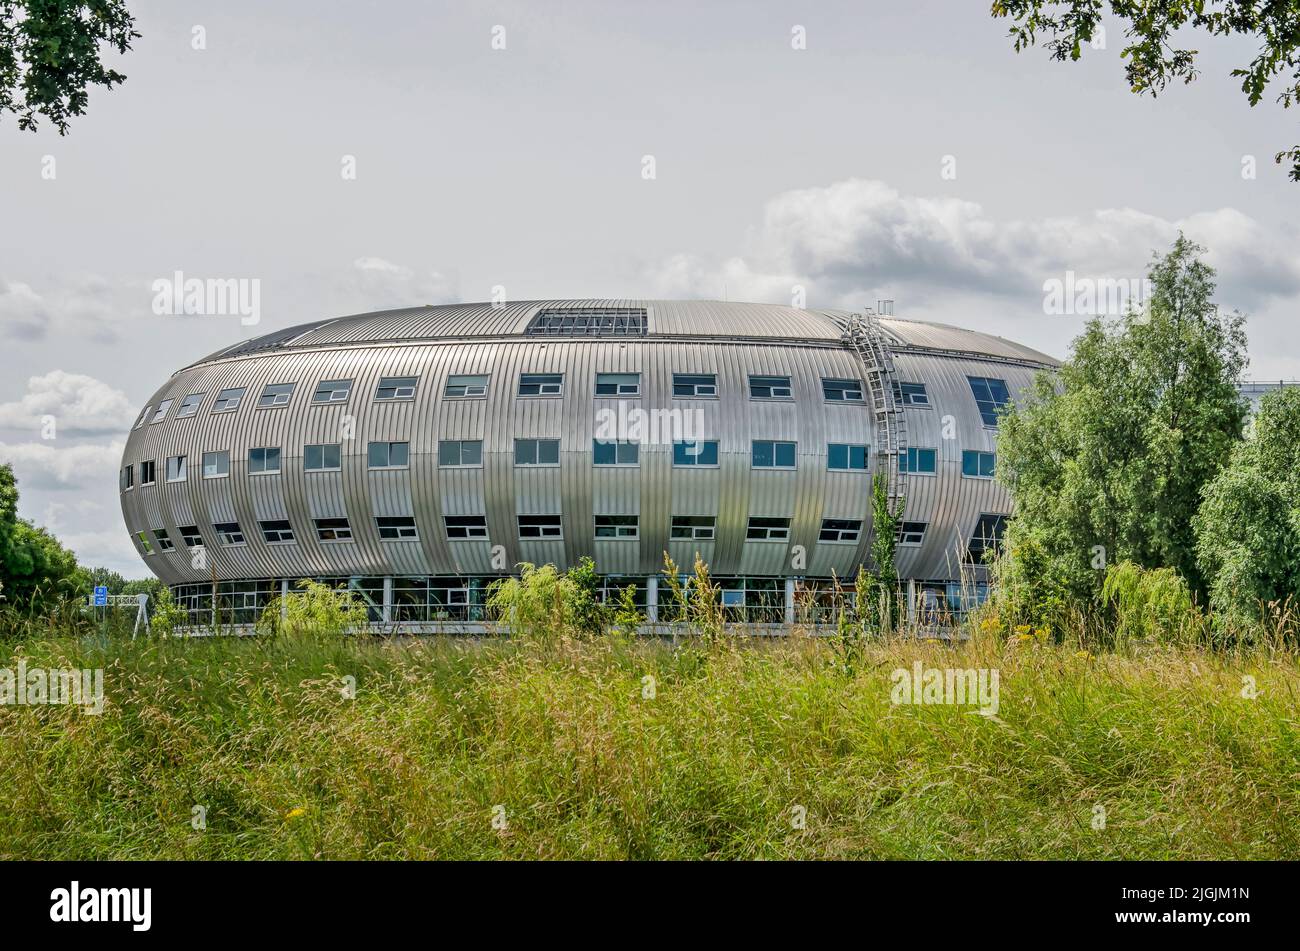 Almere, The Netherlands, July 6, 2022: remarkable, dome-shaped office building with shiny facade in a green environment Stock Photo